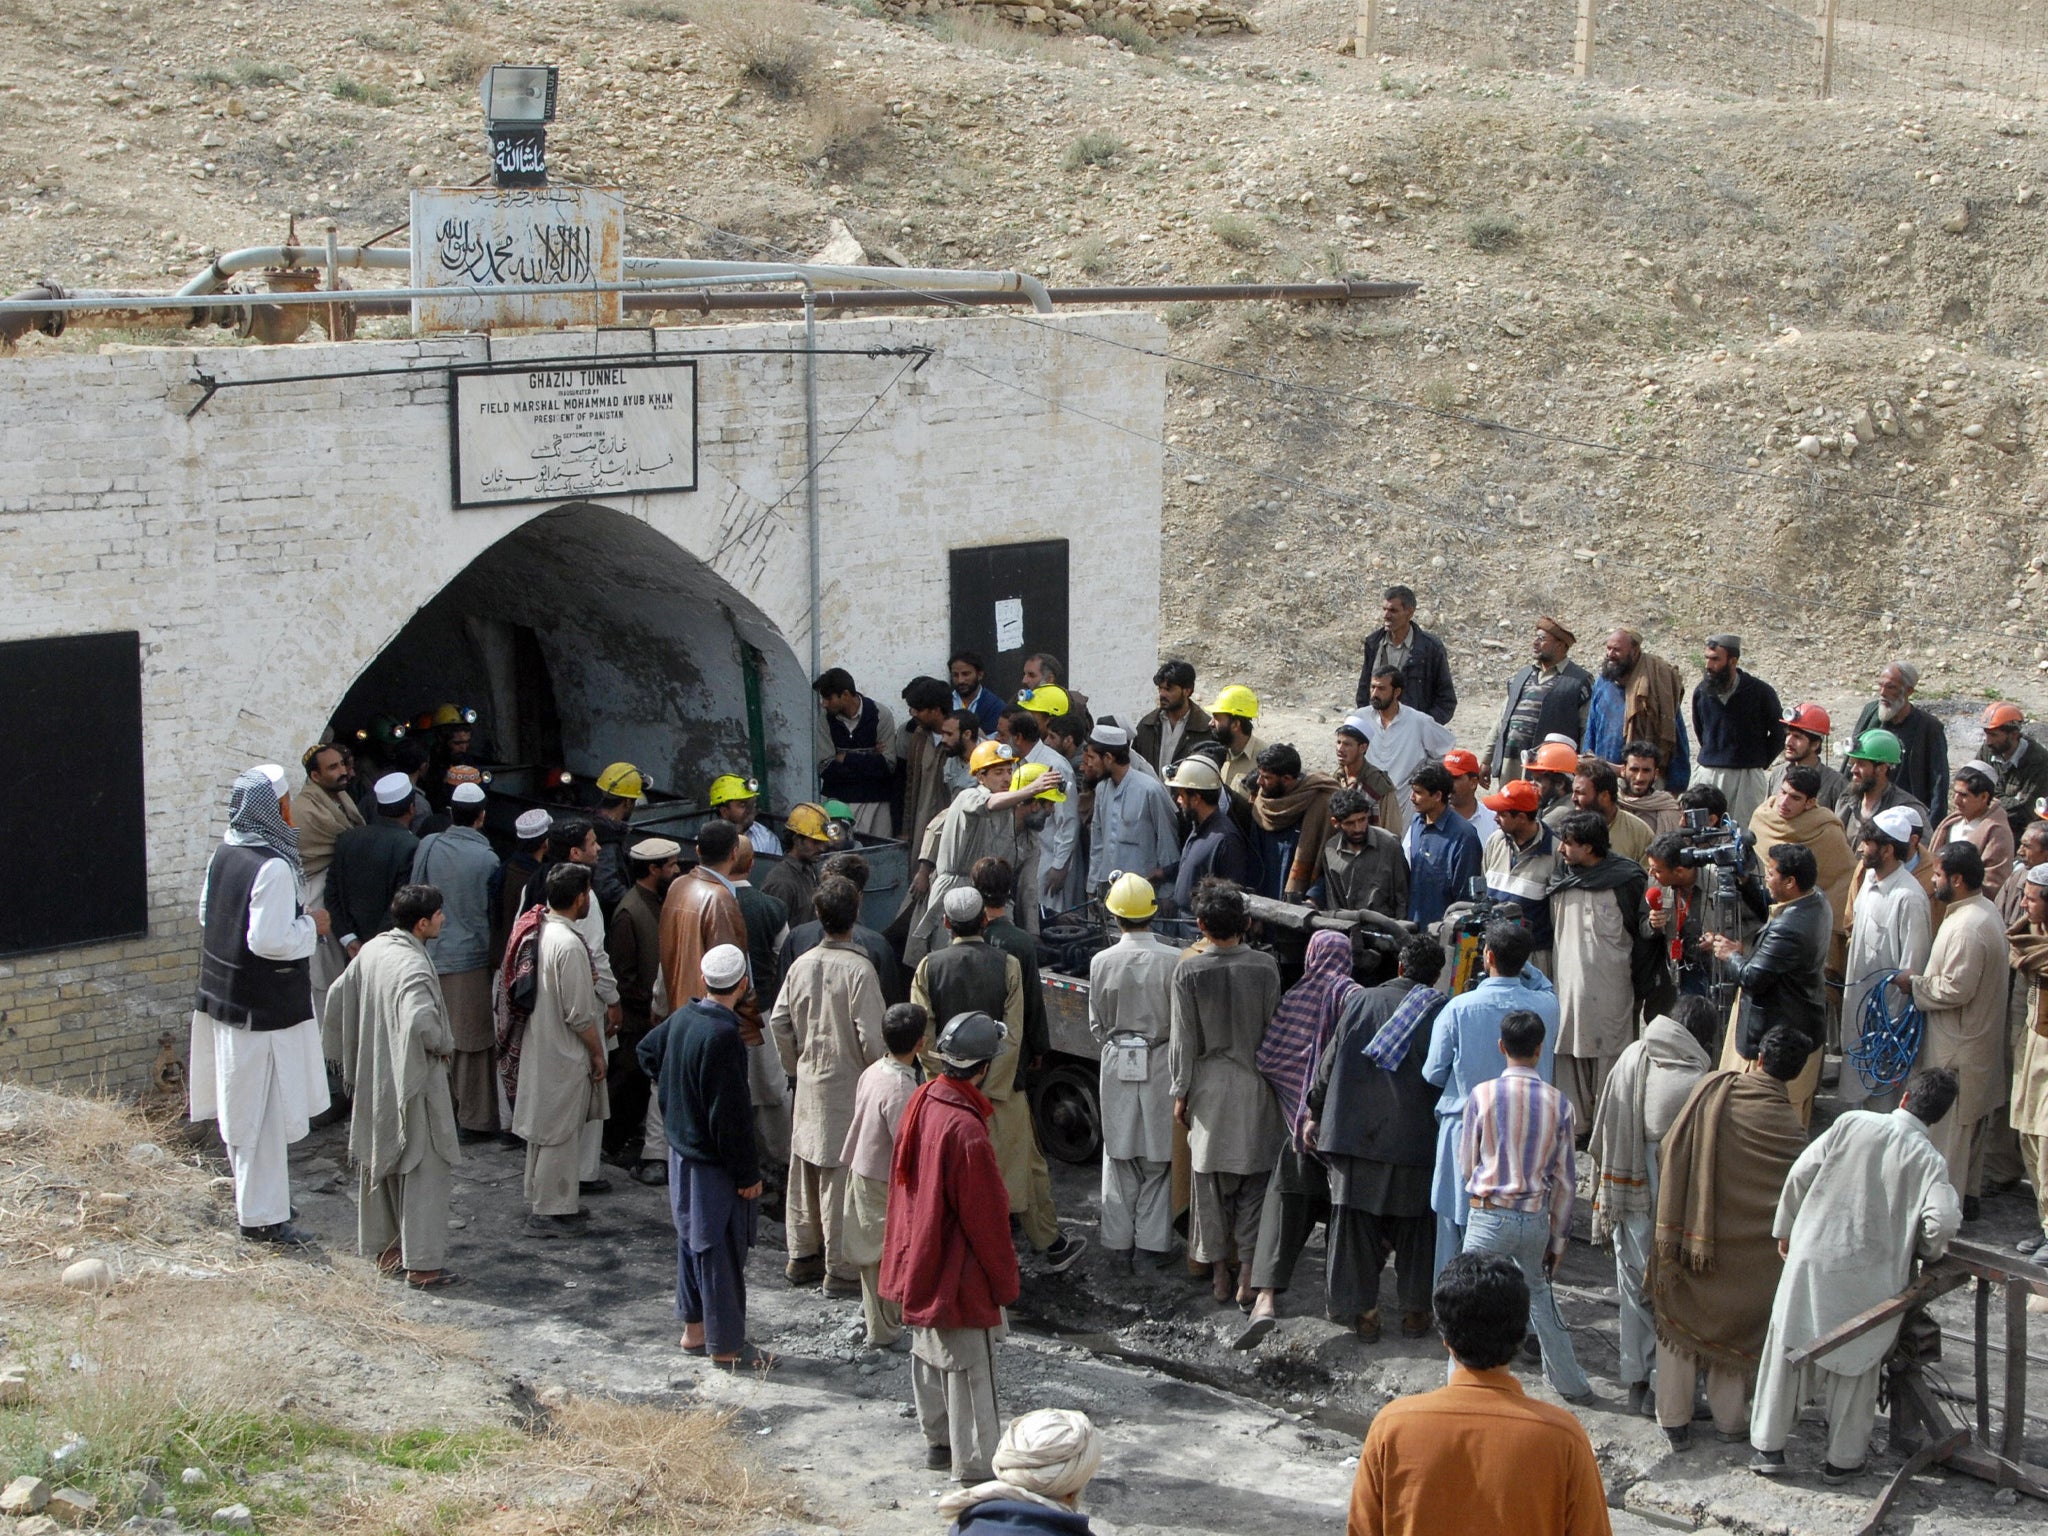 Coal miners brought to the surface after the explosion in a coal mine outside Quetta in 2009 where at least 12 miners were killed and 26 injured